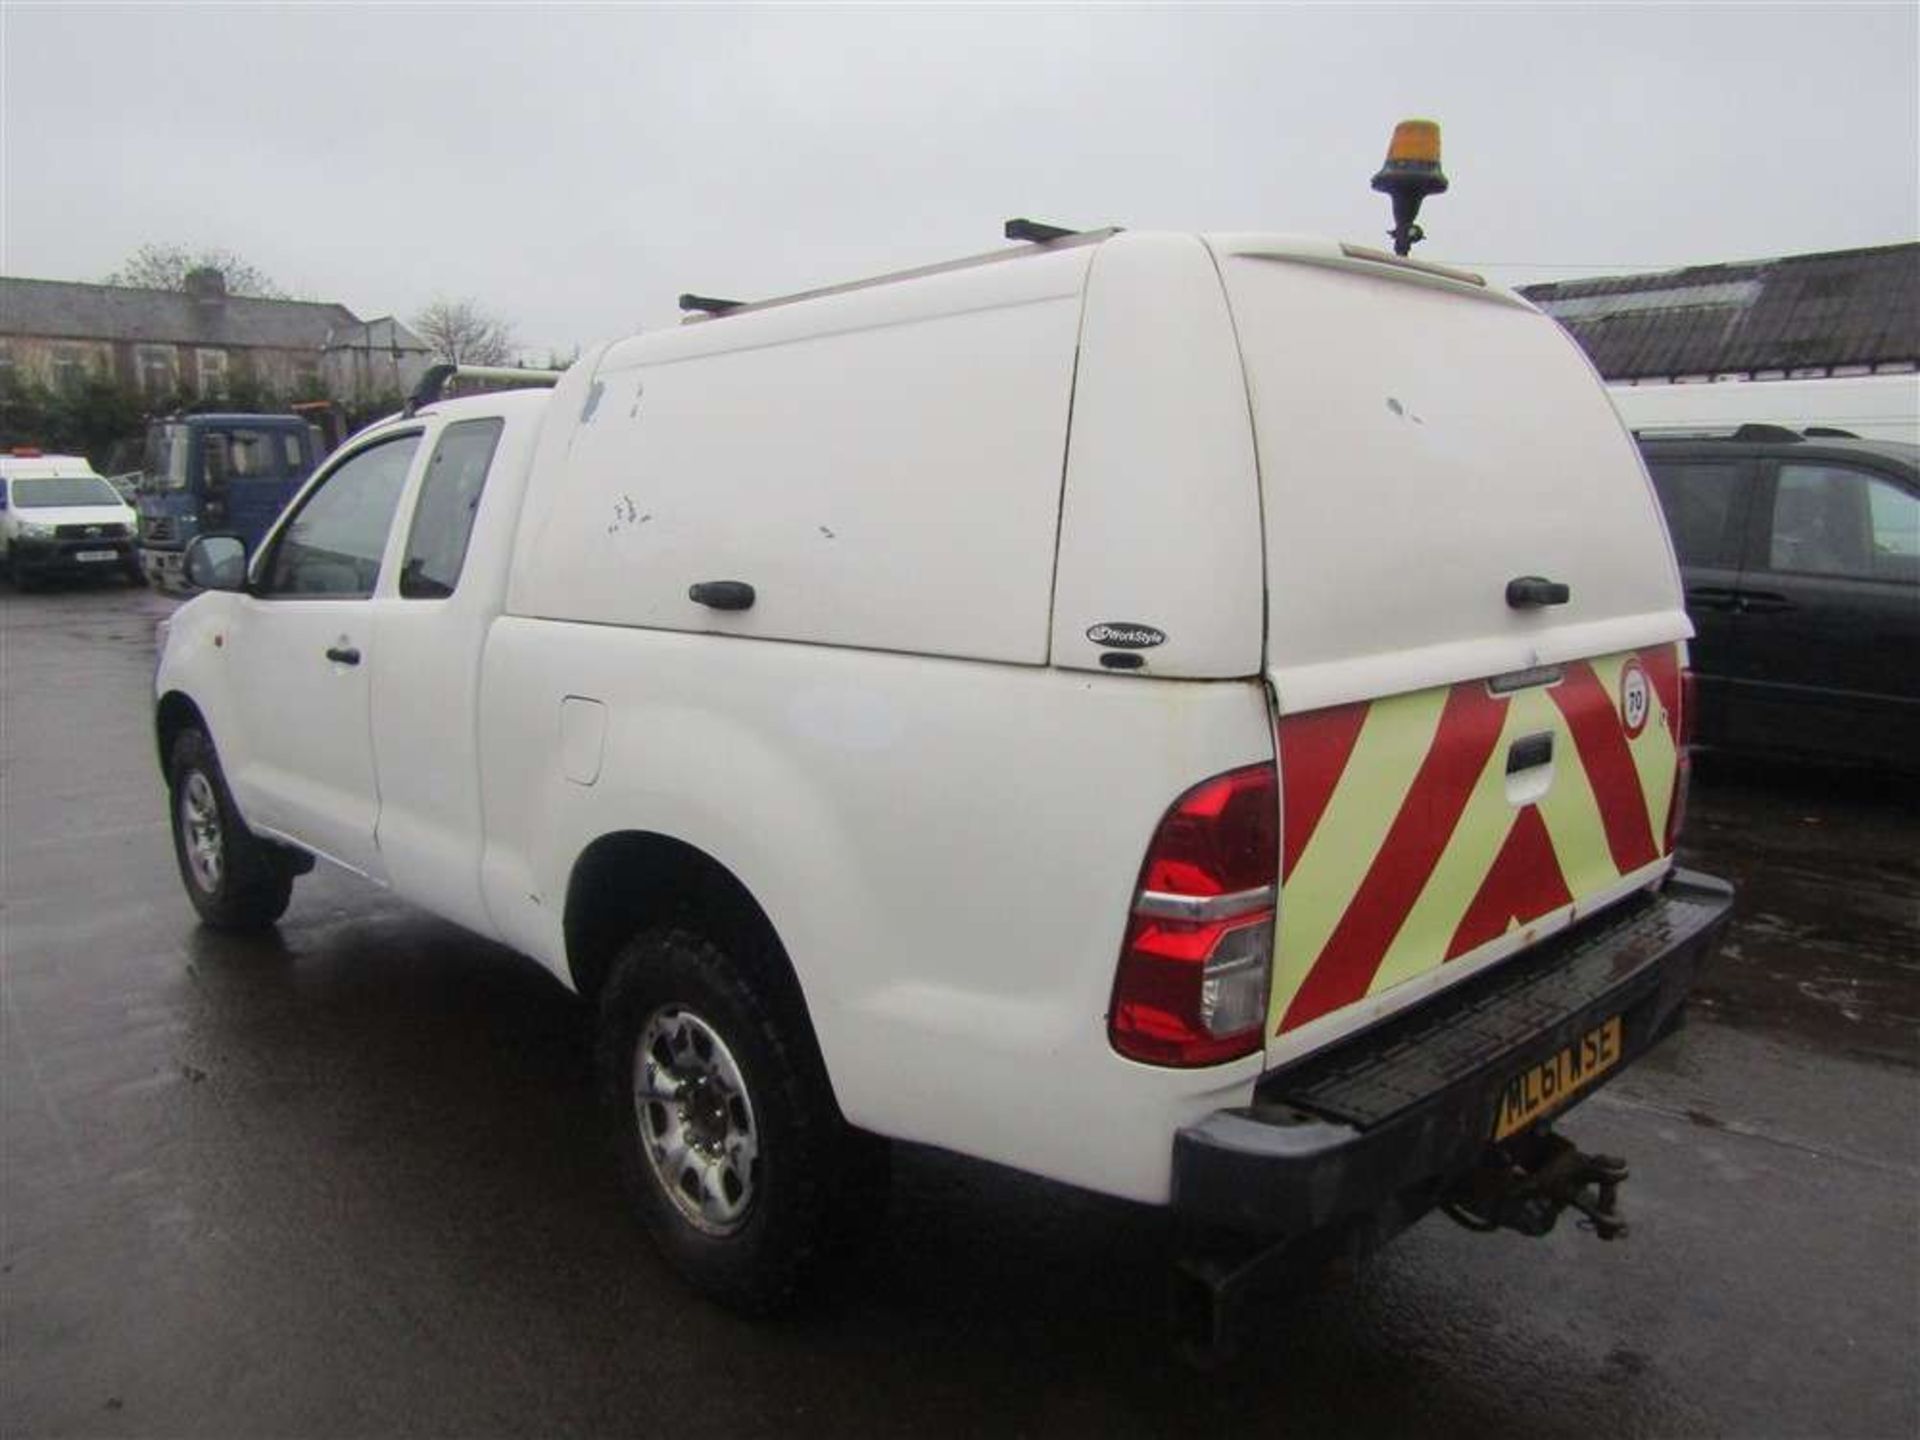 2011 61 reg Toyota Hilux HL2 D-4D 4 x 4 ECB (Direct United Utilities Water) - Image 3 of 6